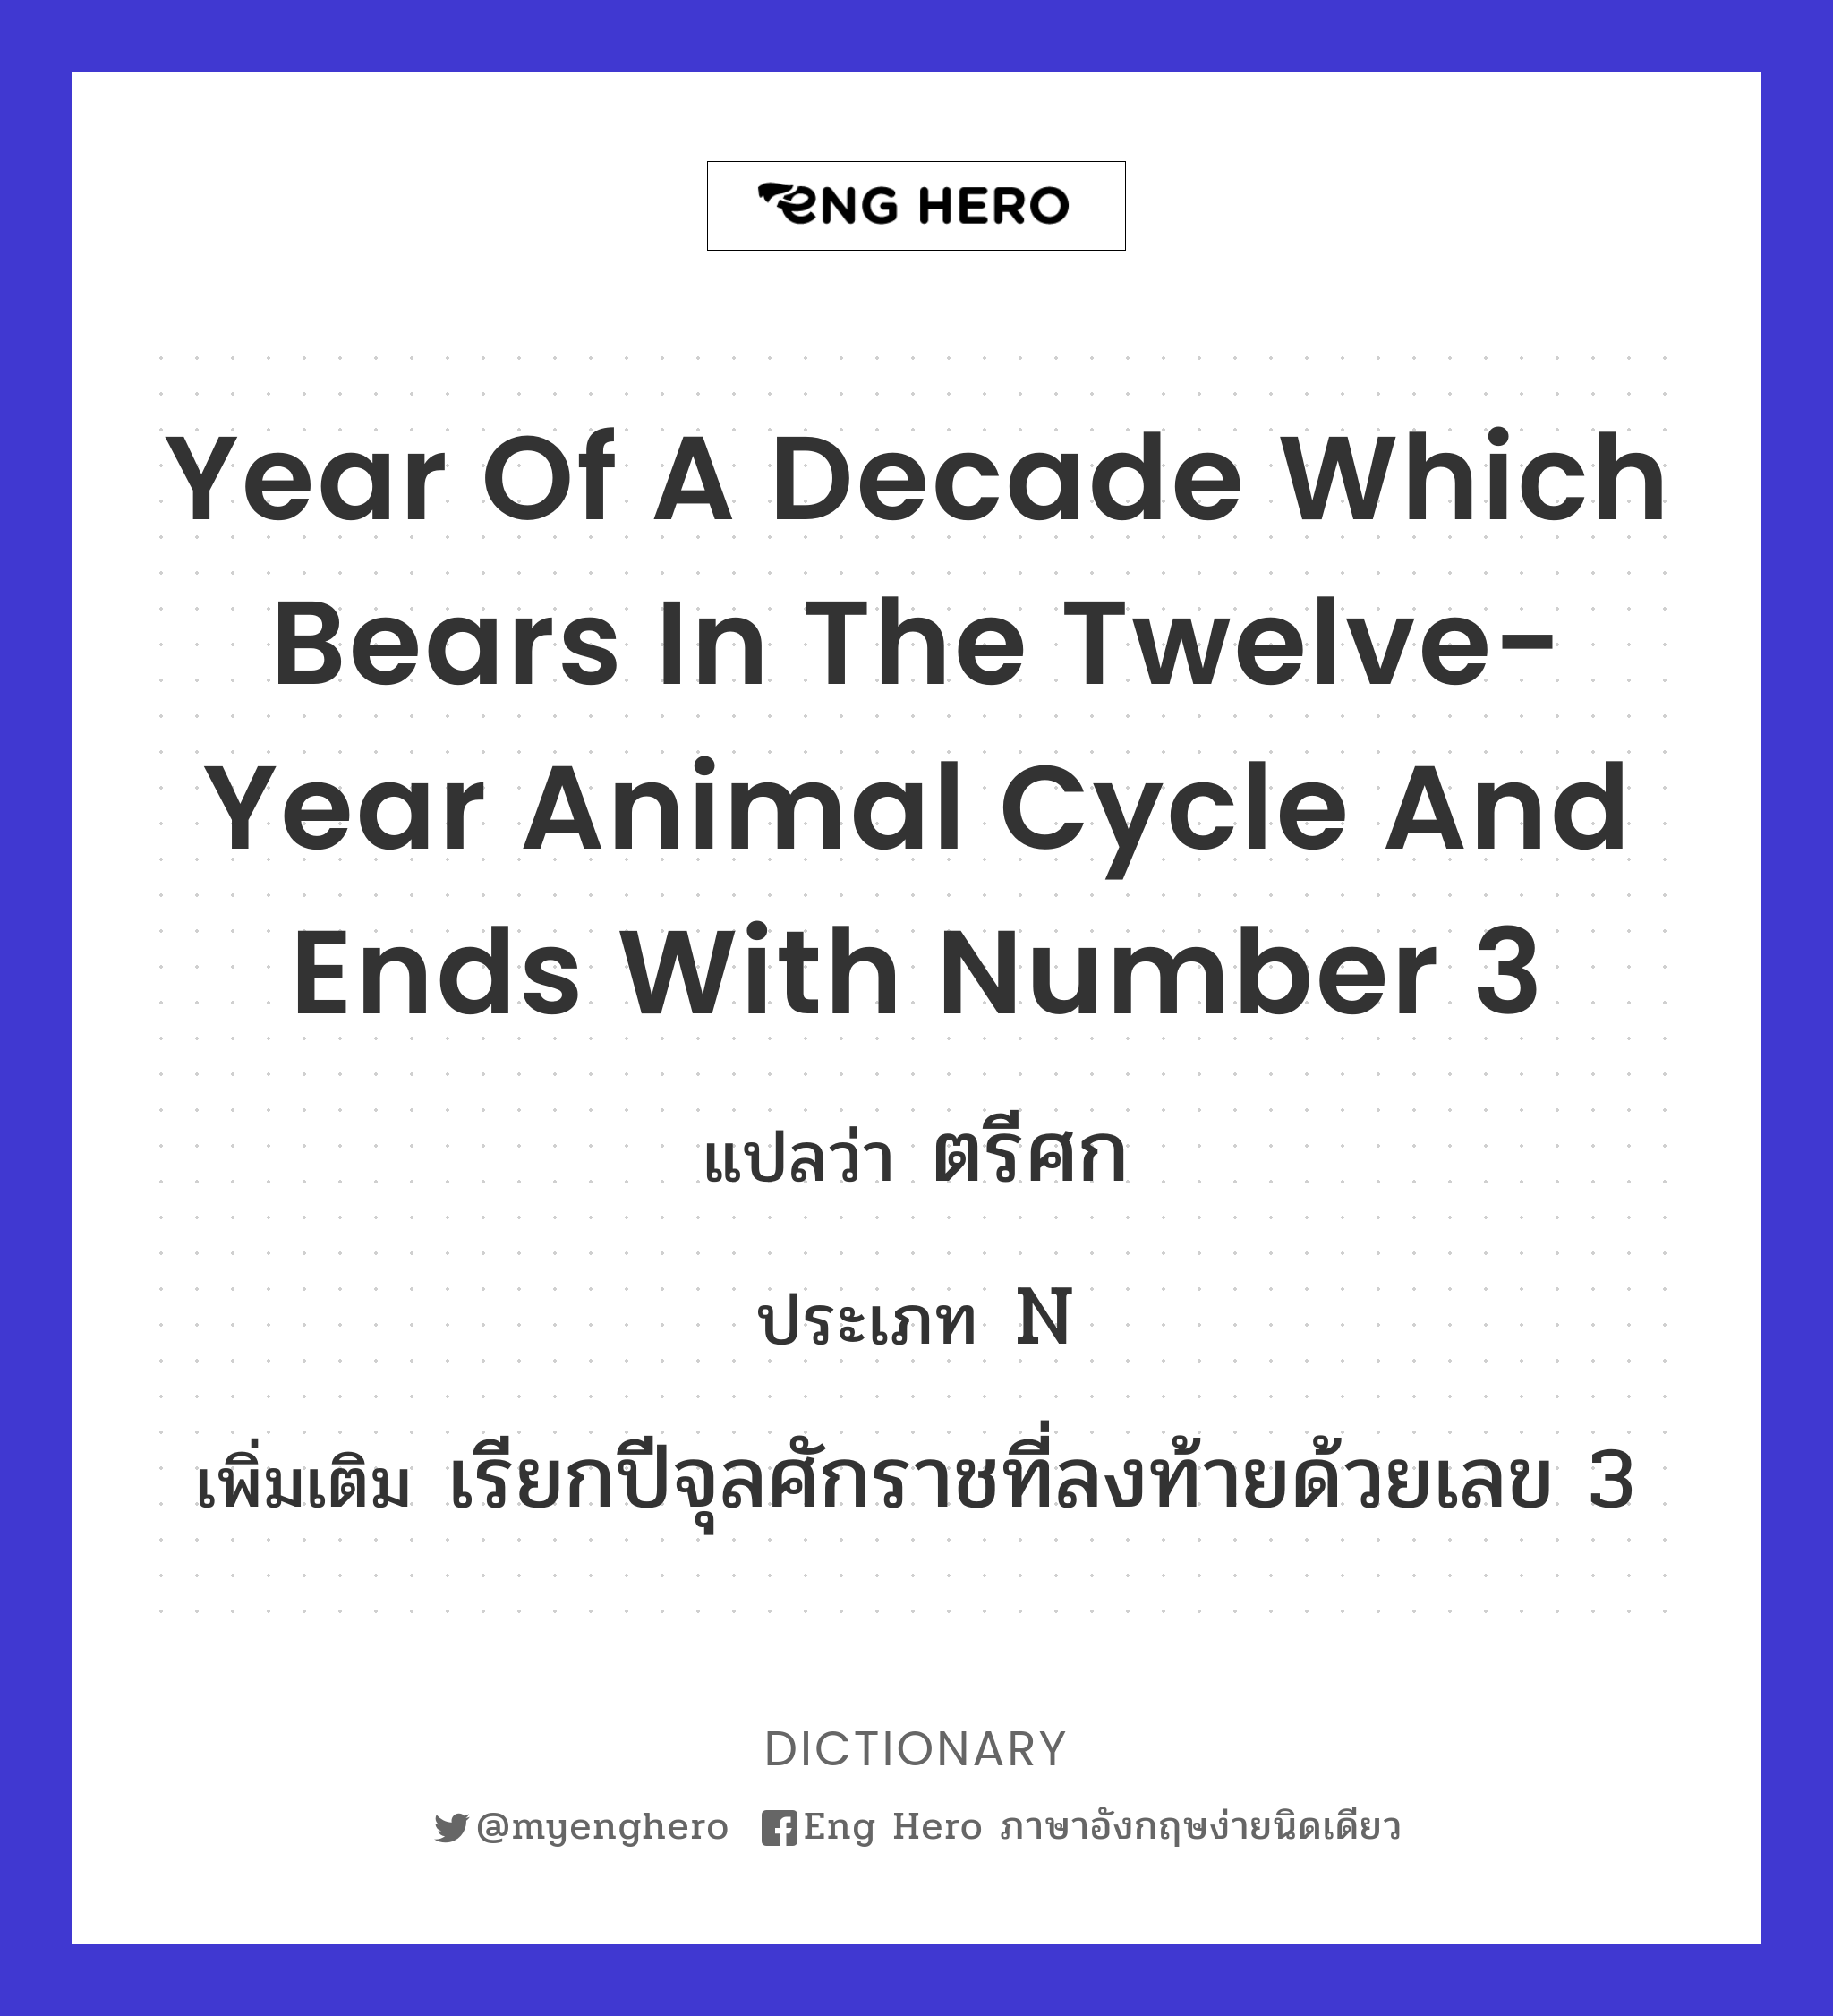 year of a decade which bears in the twelve-year animal cycle and ends with number 3